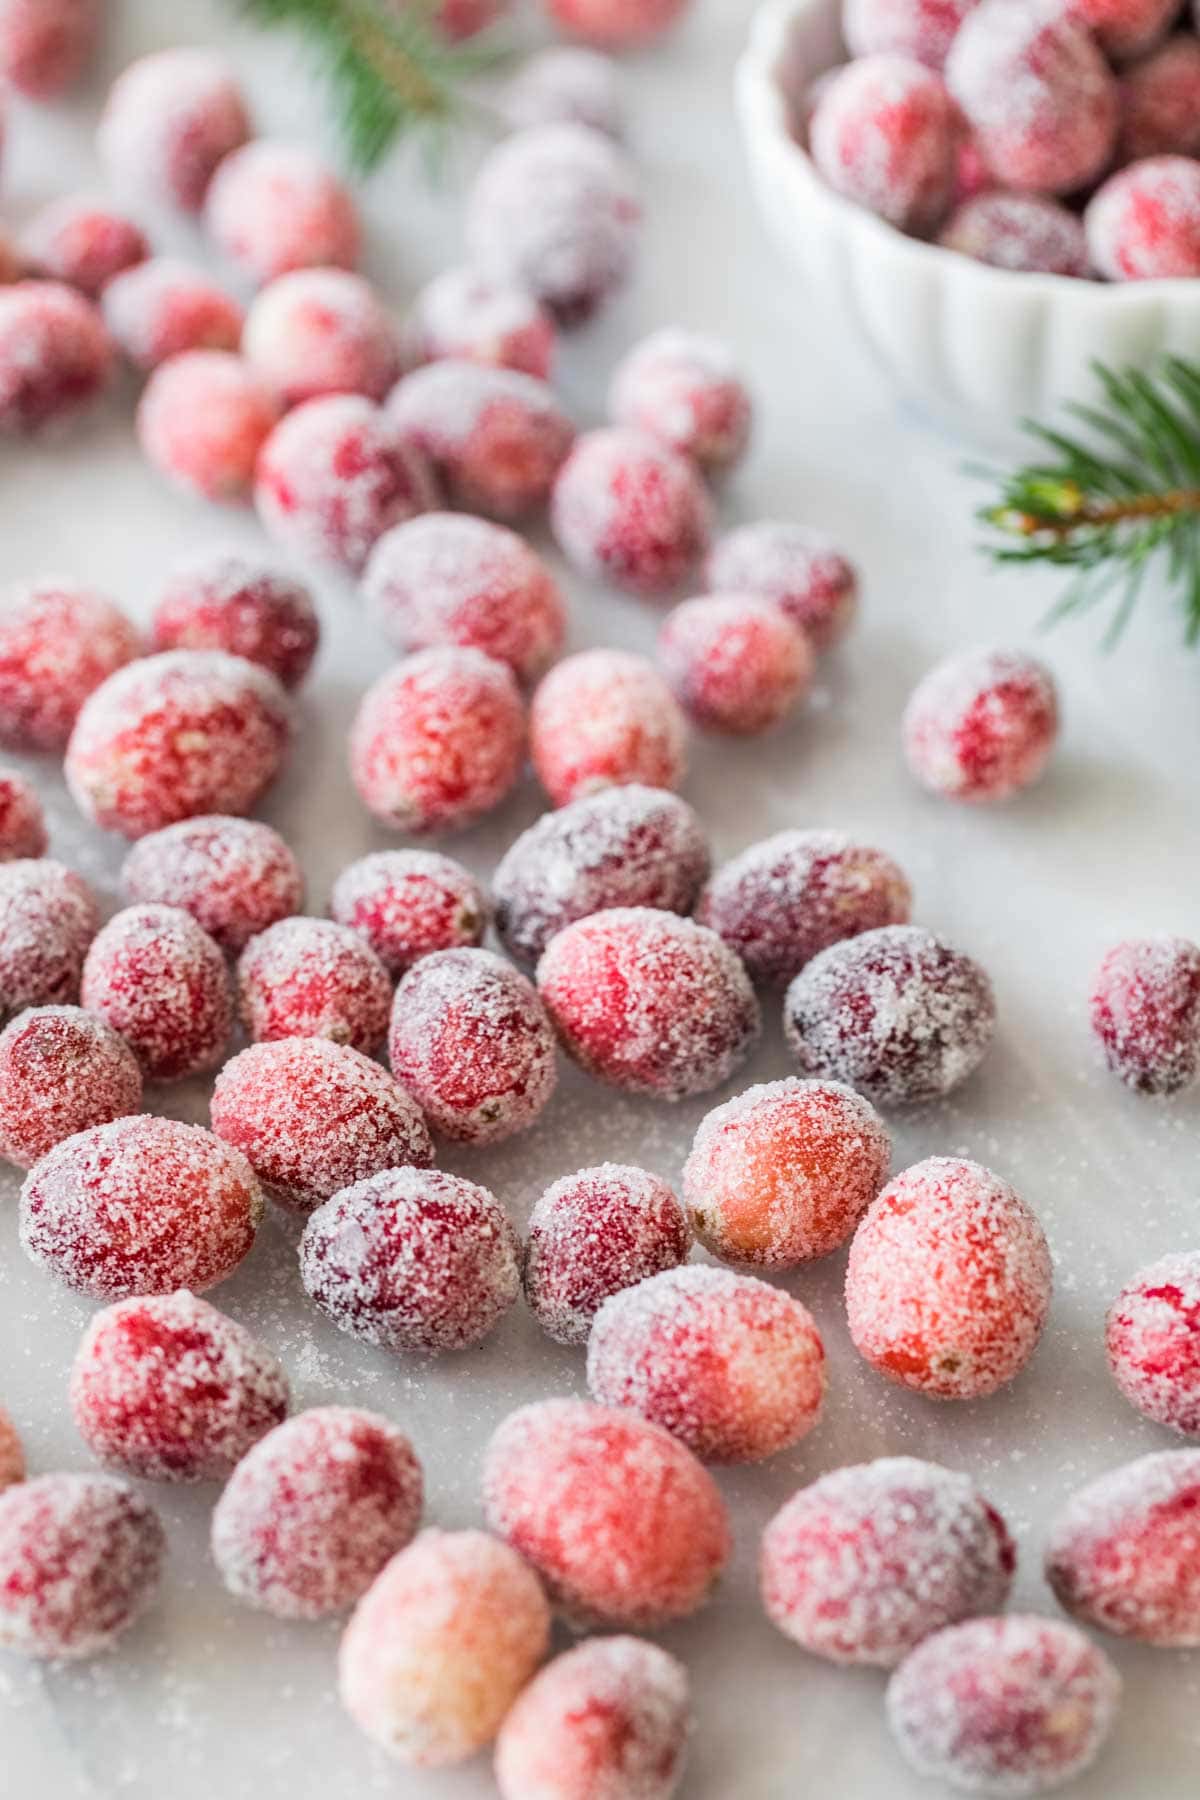 Cranberries that have been dipped in syrup and coated in granulated sugar to create a frosted, snow-covered look.